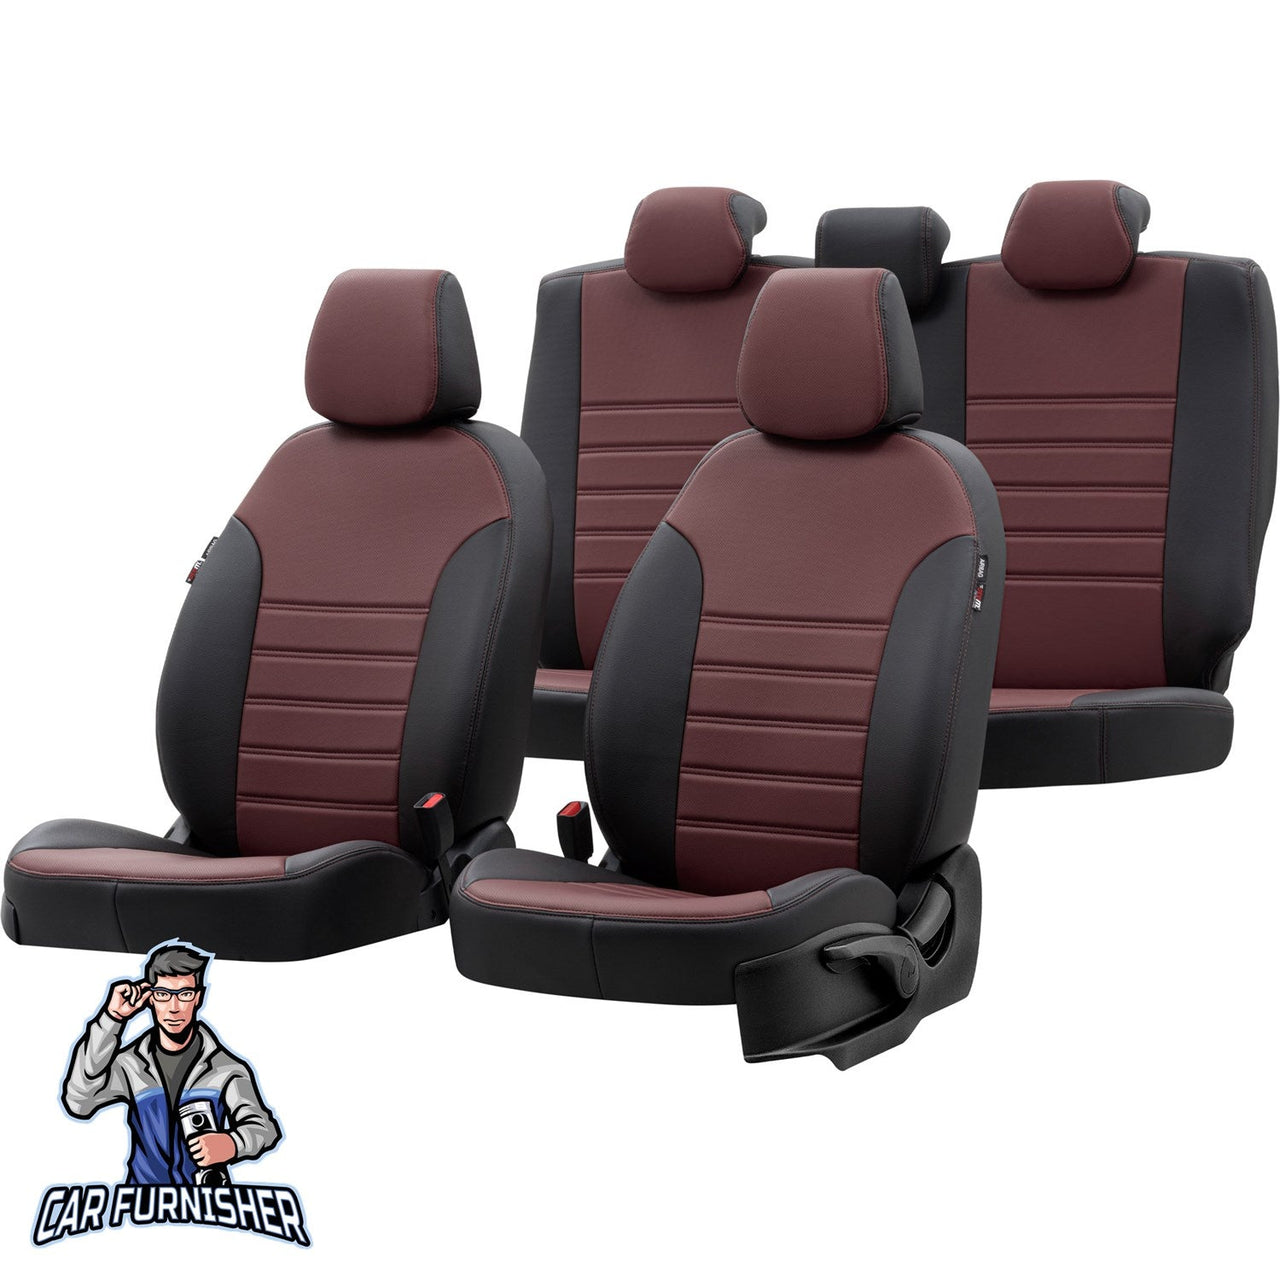 Jeep Compass Seat Covers Istanbul Leather Design Burgundy Leather